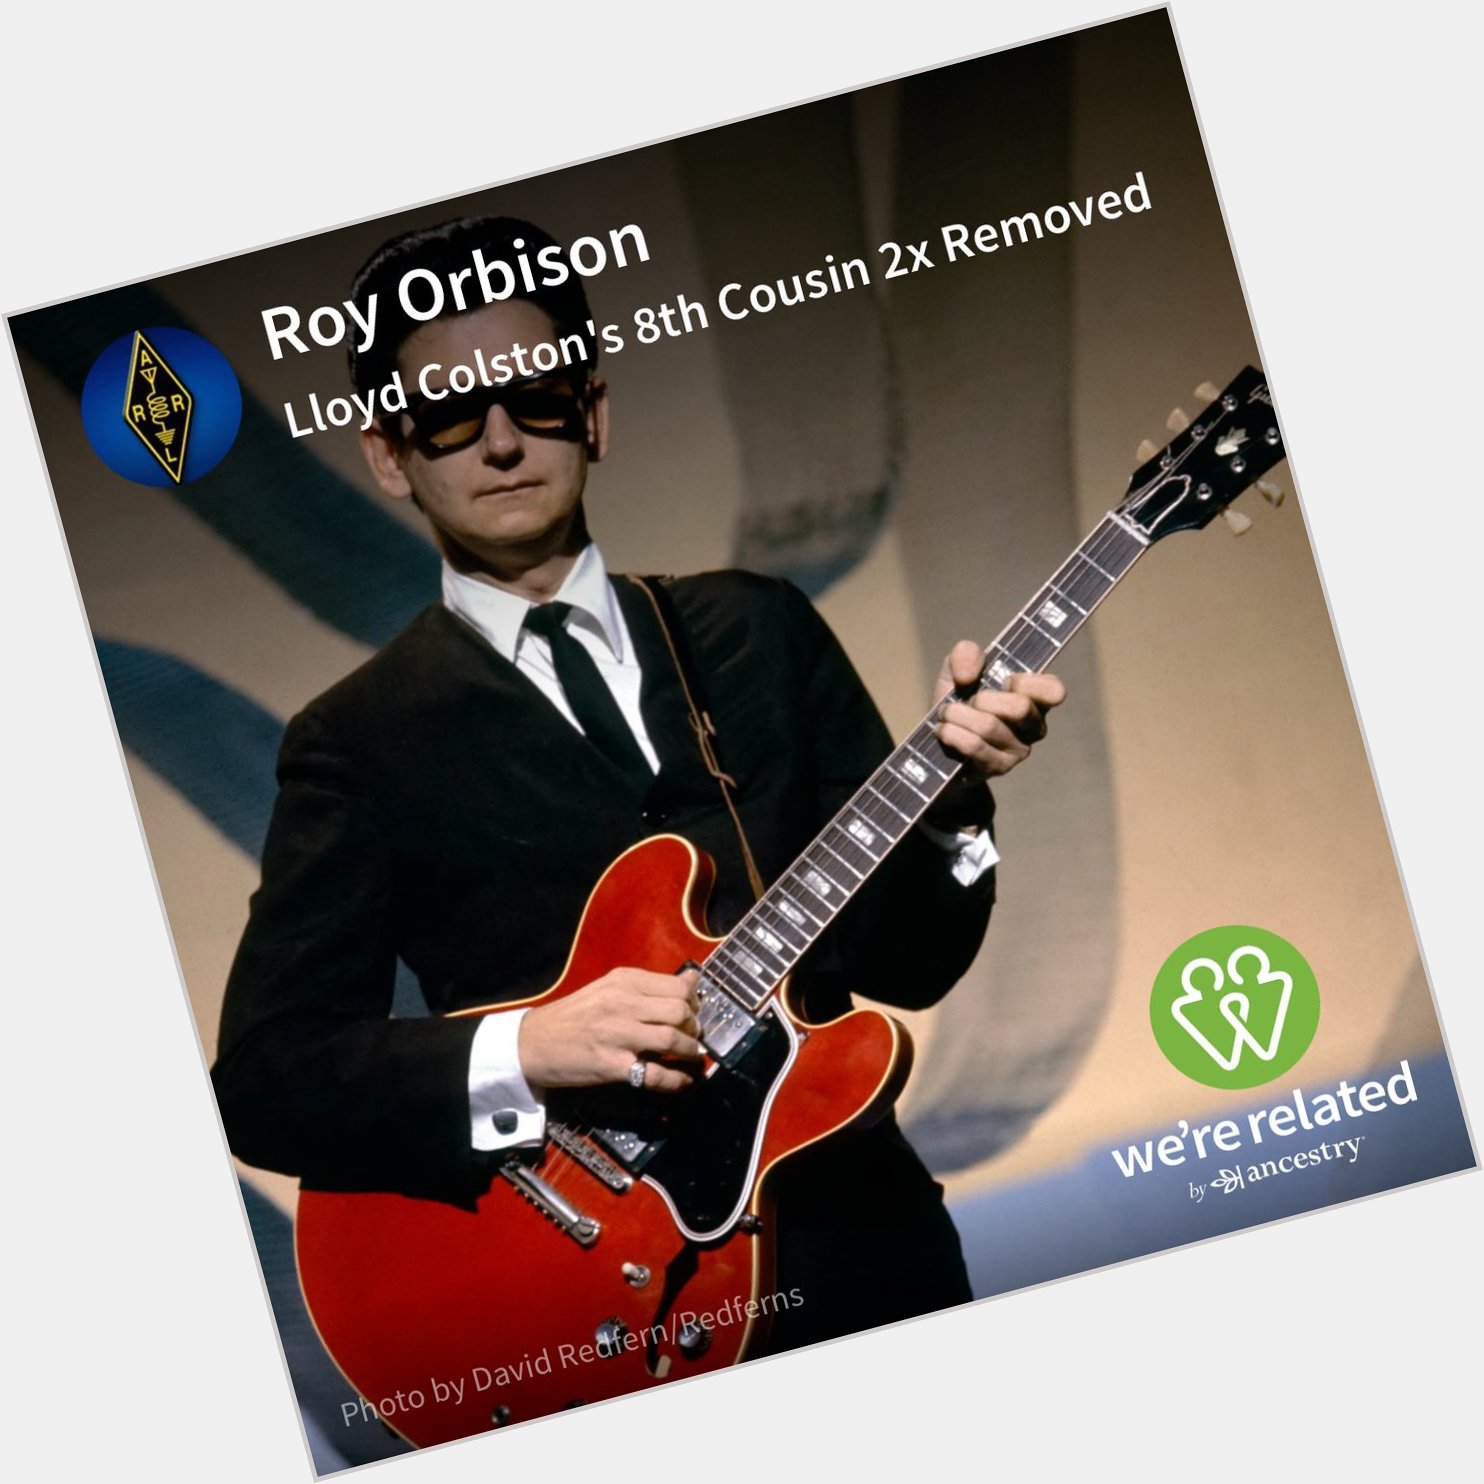 Happy Birthday Cousin!!!  I might be related to Roy Orbison!  